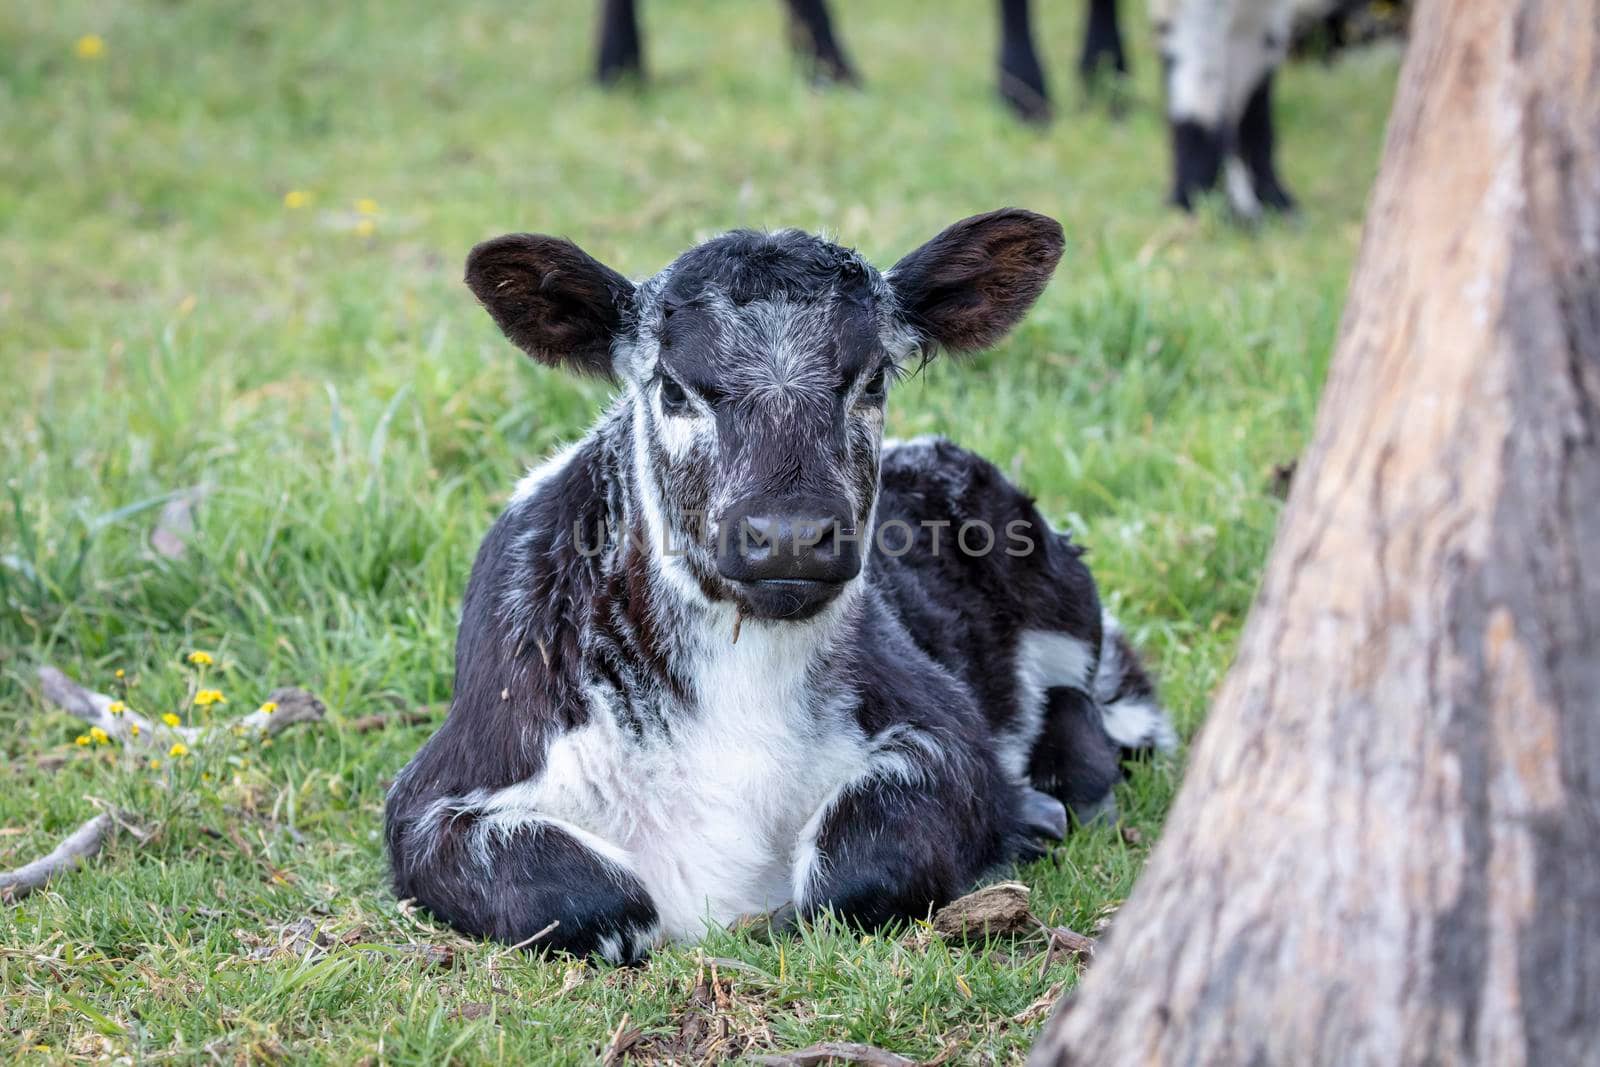 A black and white calf sitting on the ground in a green pasture staring directly ahead in regional Australia